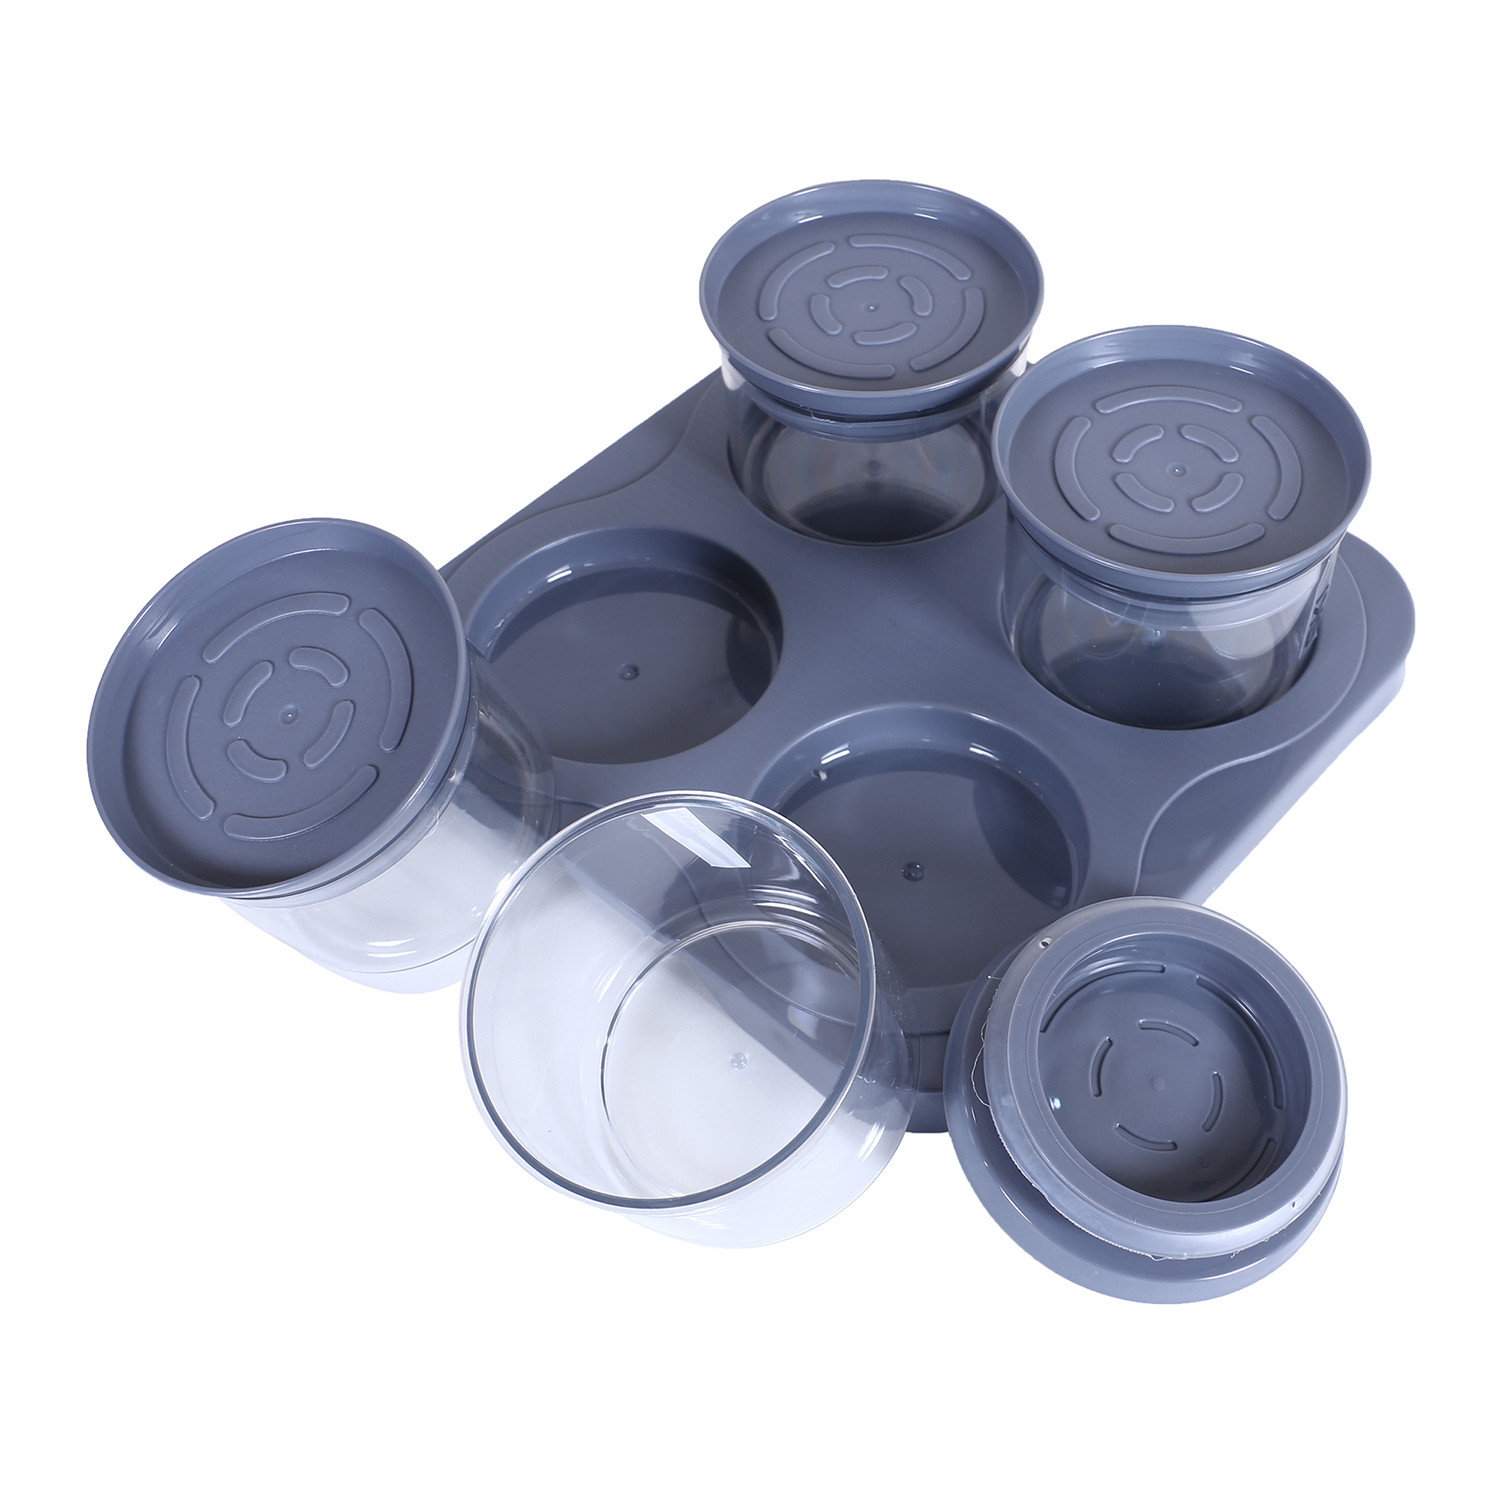 Kuber Industries 4 Containers & Tray Set|Unbreakable Plastic Snackers,Cookies,Nuts Serving Tray|Airtight Containers with Lid,350 ml (Gray)